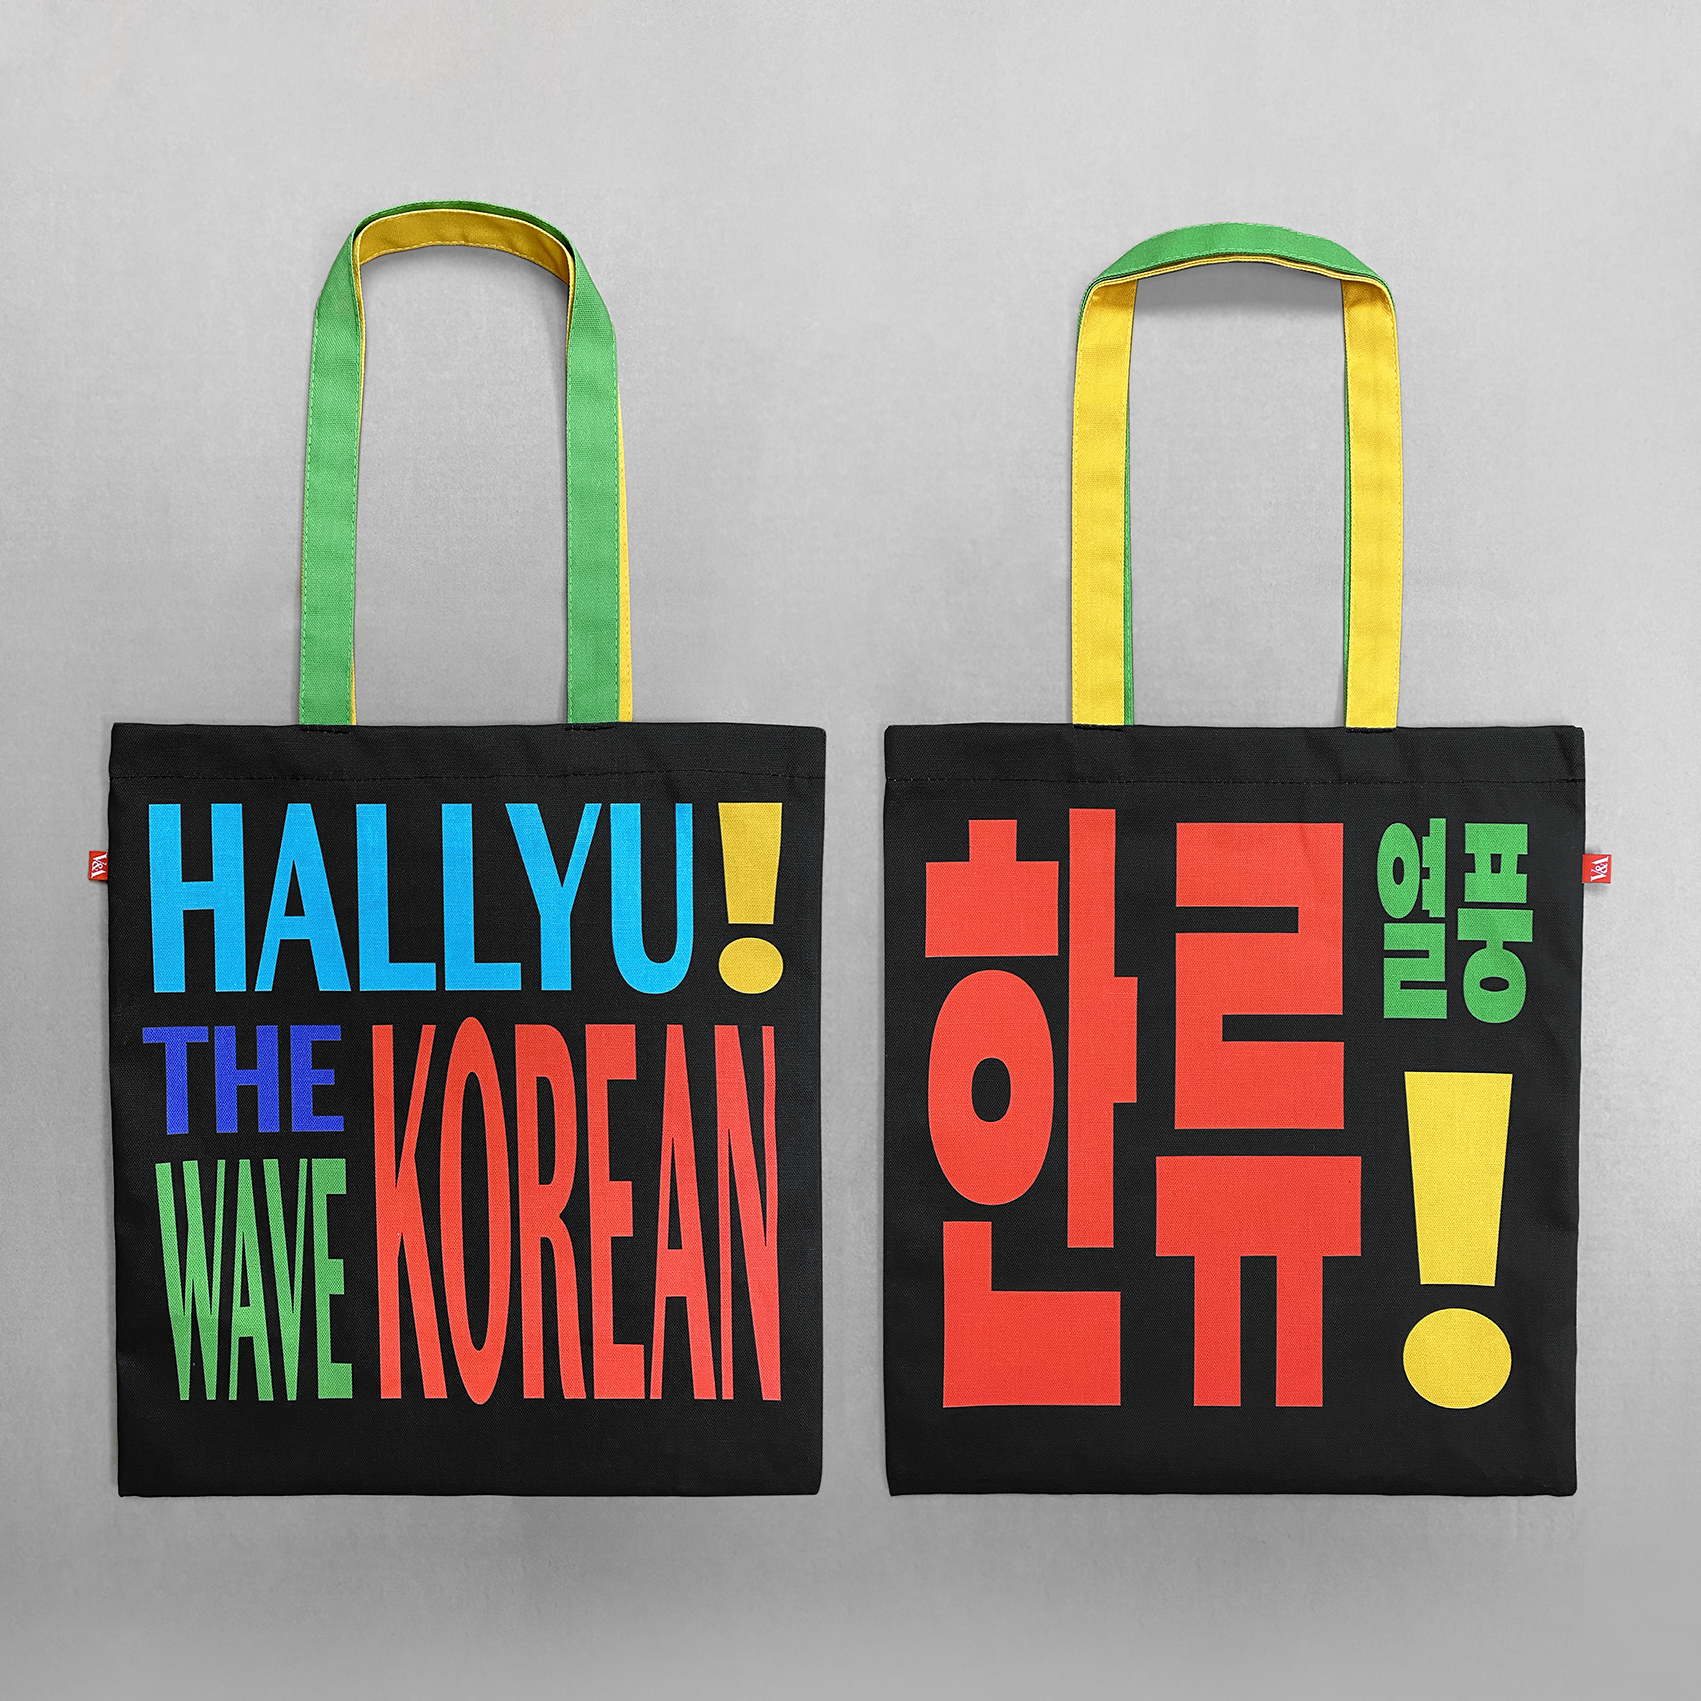 Hallyu! The Korean Wave book bag printed by paul bristow in the uk for the Victoria and Albert Museum